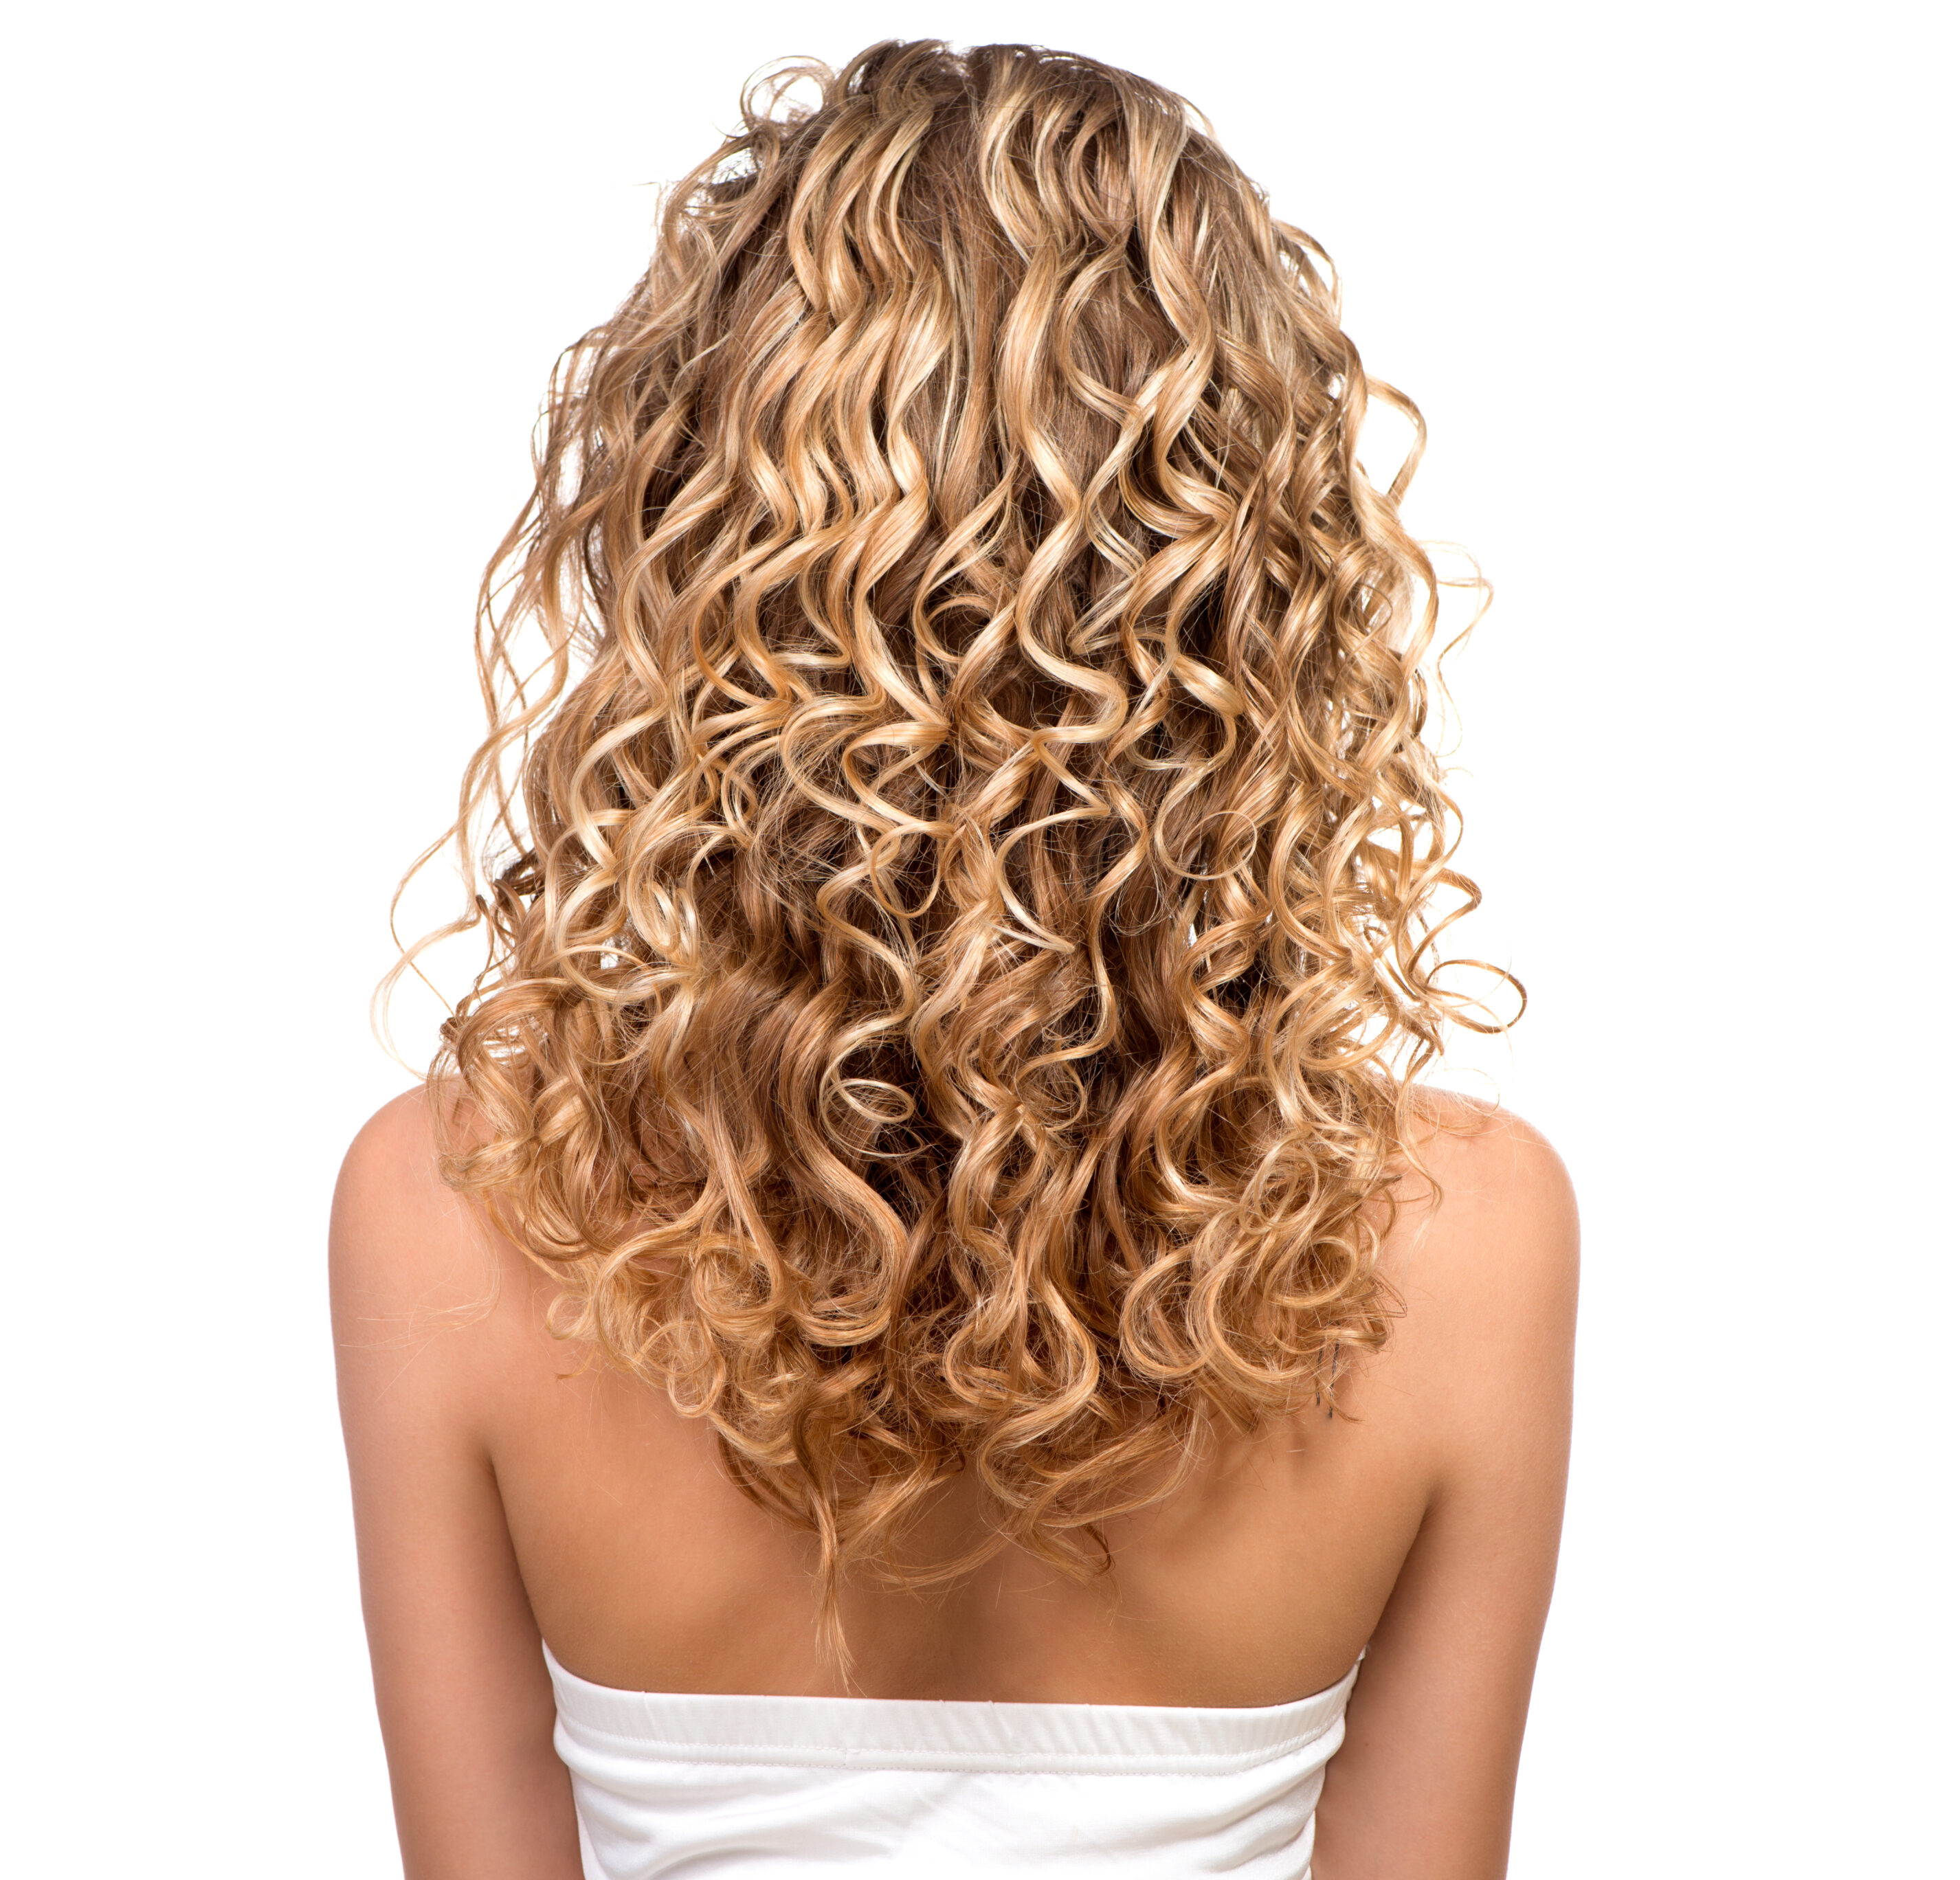 Healthy and long blond wavy hair